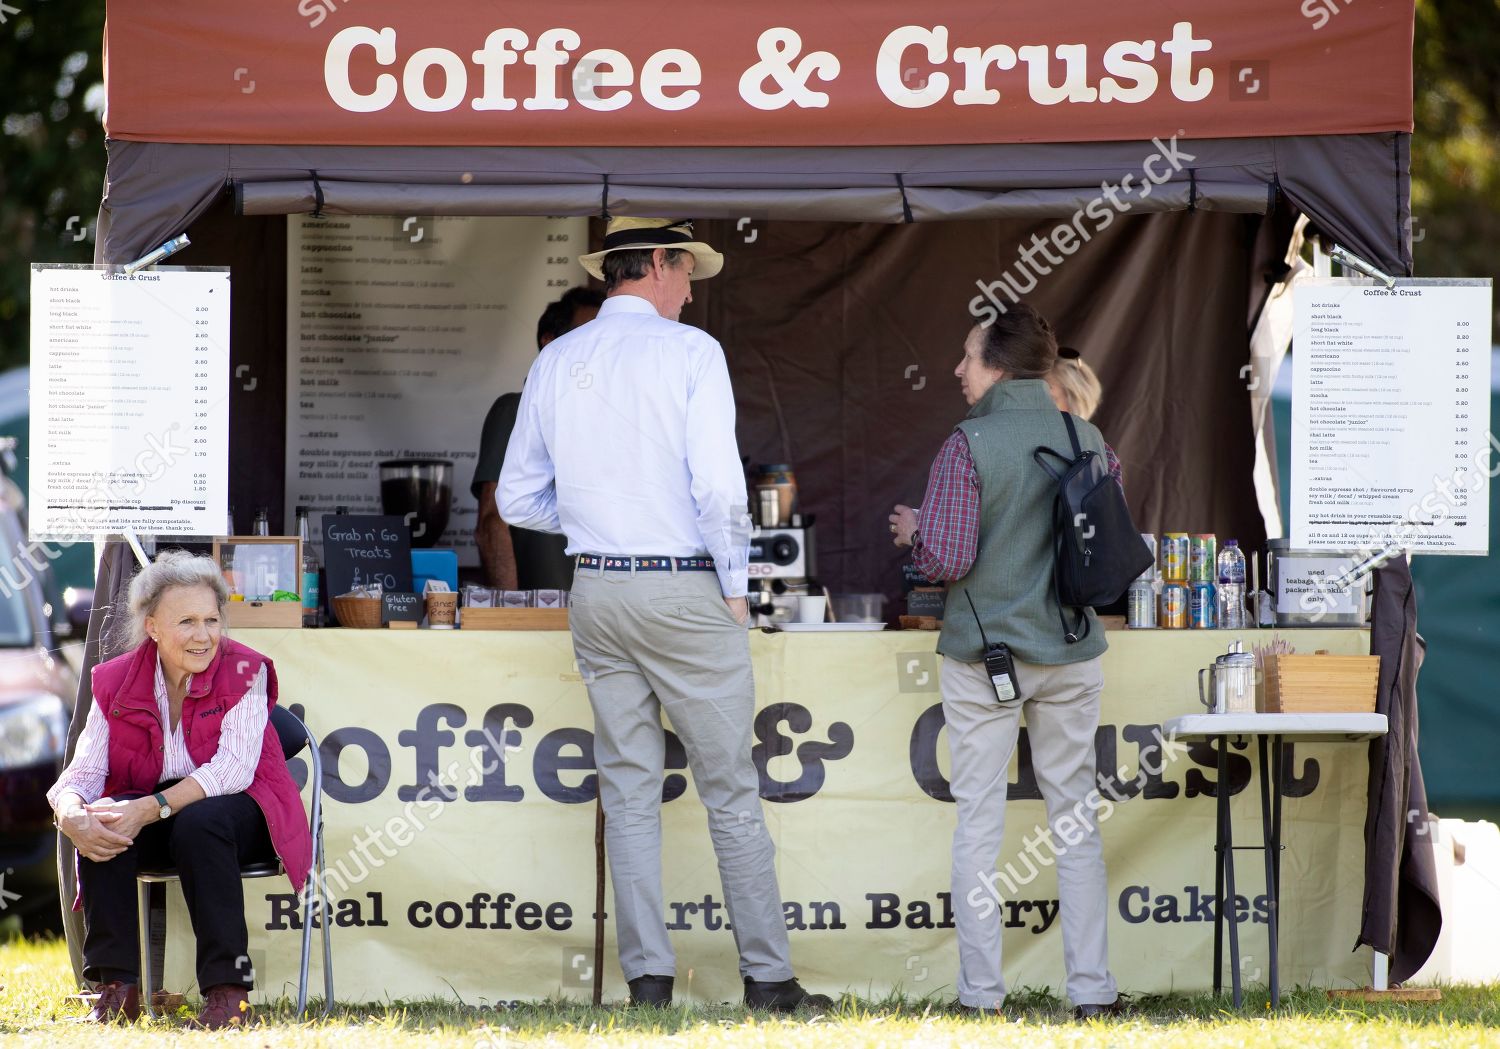 the-whatley-manor-horse-trials-gatcombe-park-uk-shutterstock-editorial-10413907a.jpg